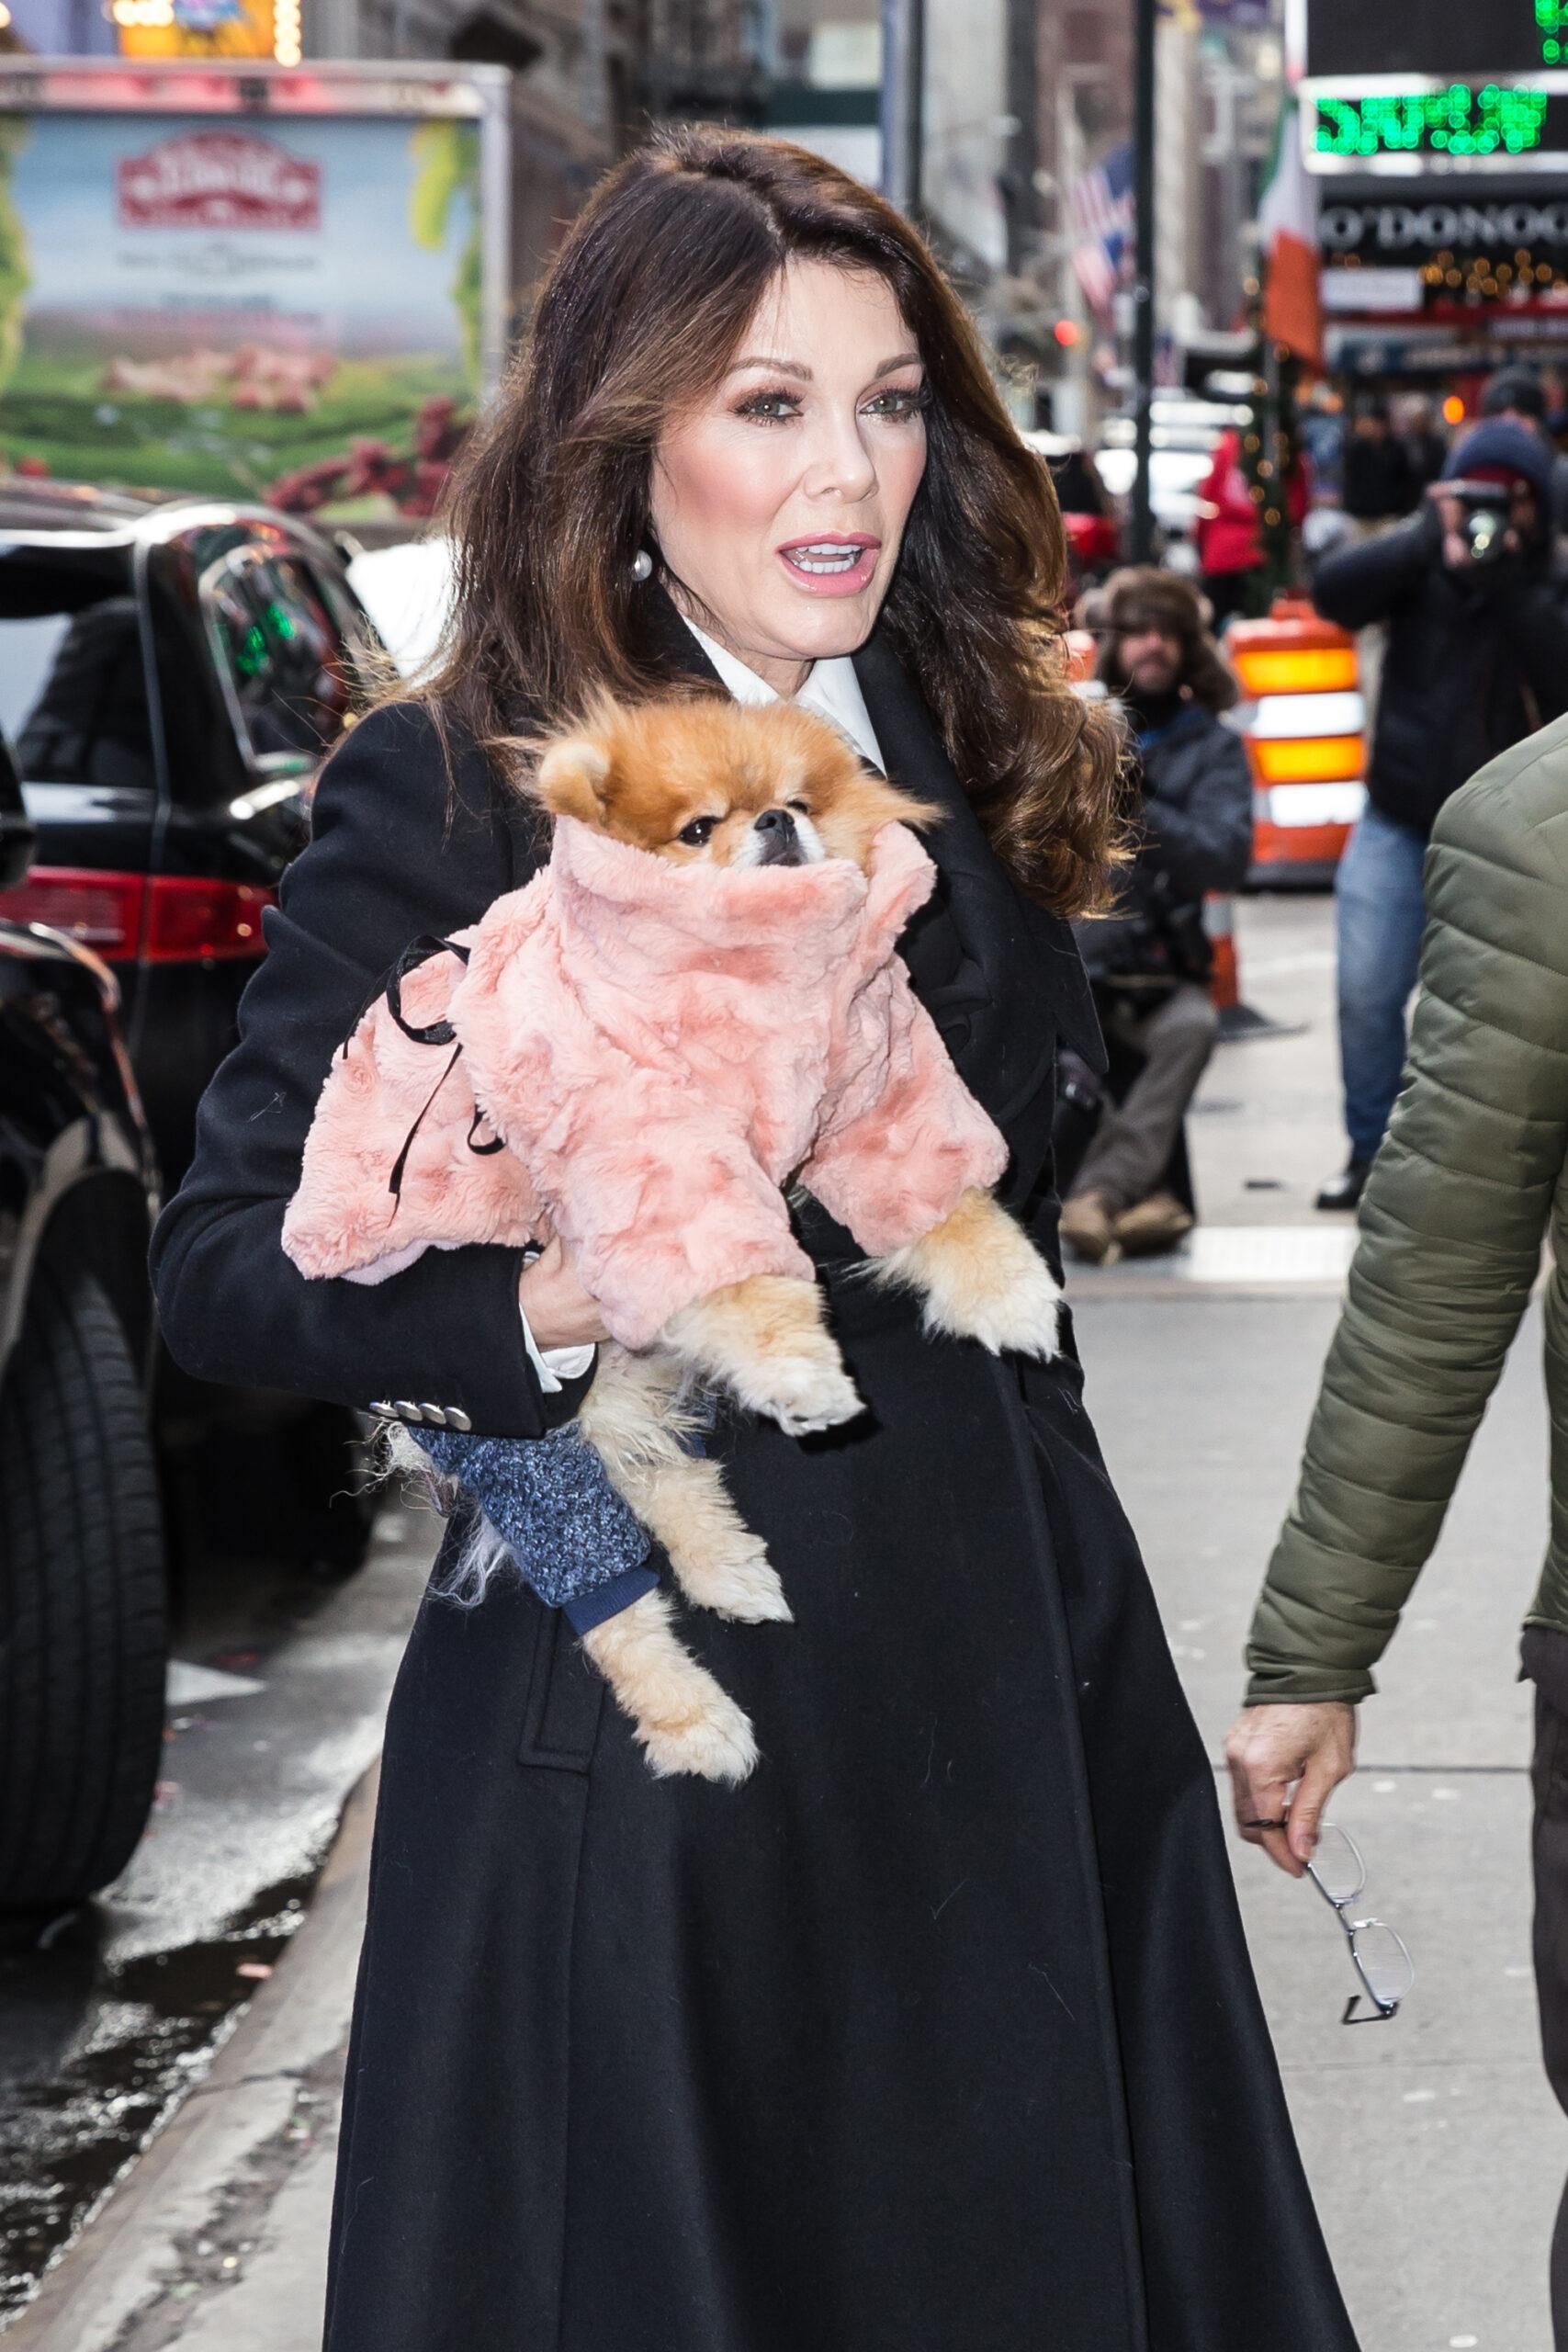 A photo of Lisa Vanderpump walking on the streets with her fully-clothed furry friend.